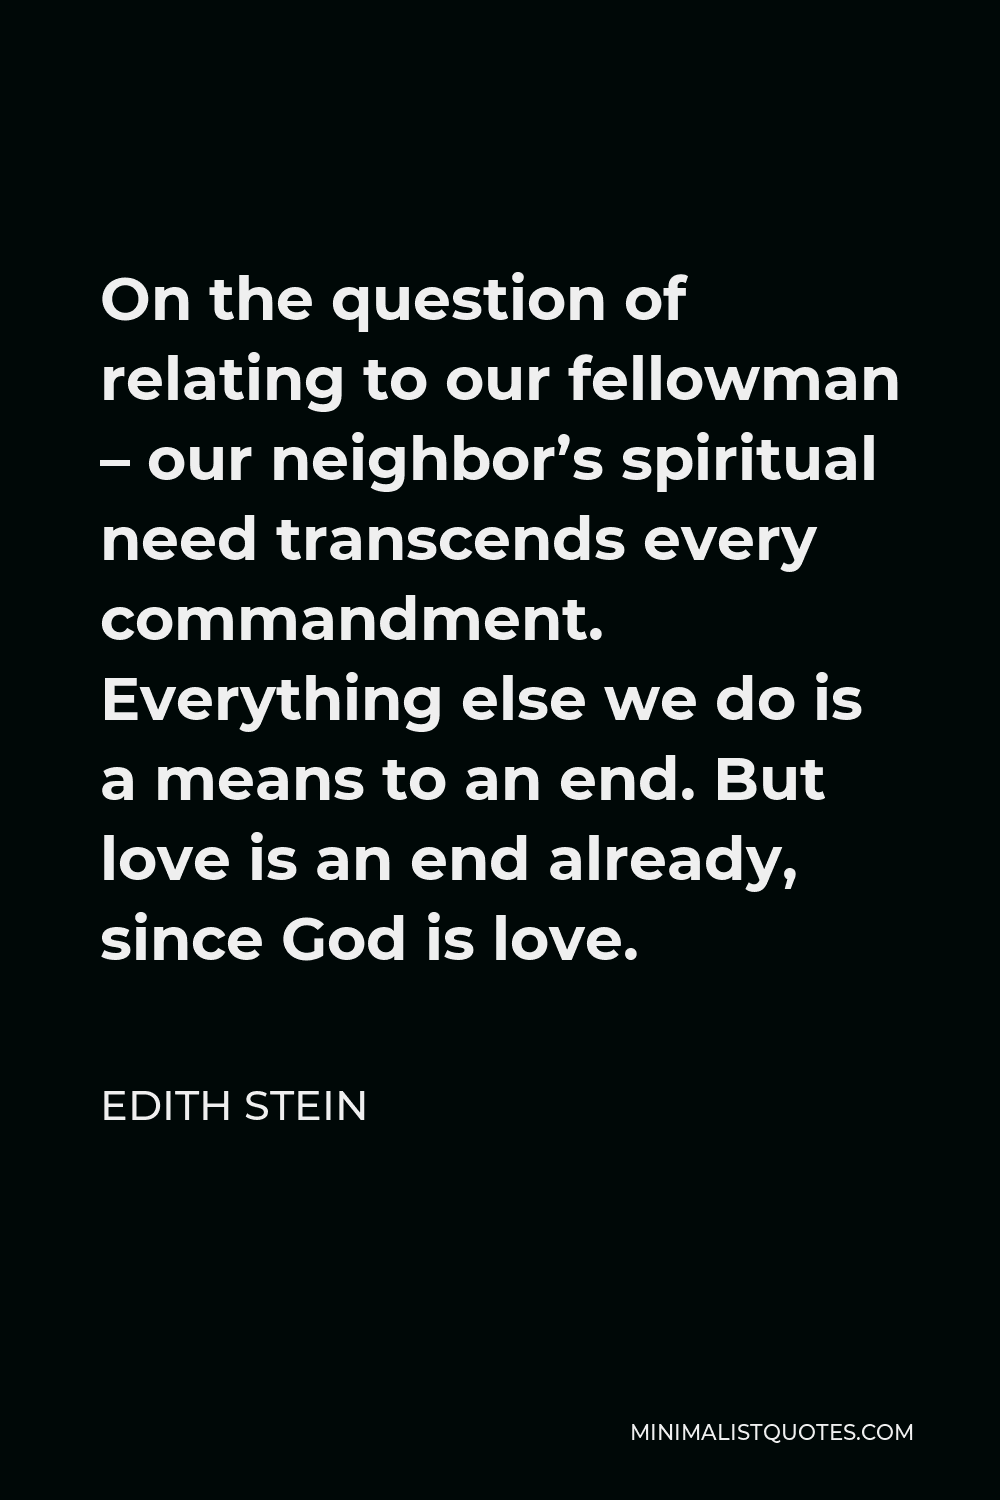 Edith Stein Quote - On the question of relating to our fellowman – our neighbor’s spiritual need transcends every commandment. Everything else we do is a means to an end. But love is an end already, since God is love.